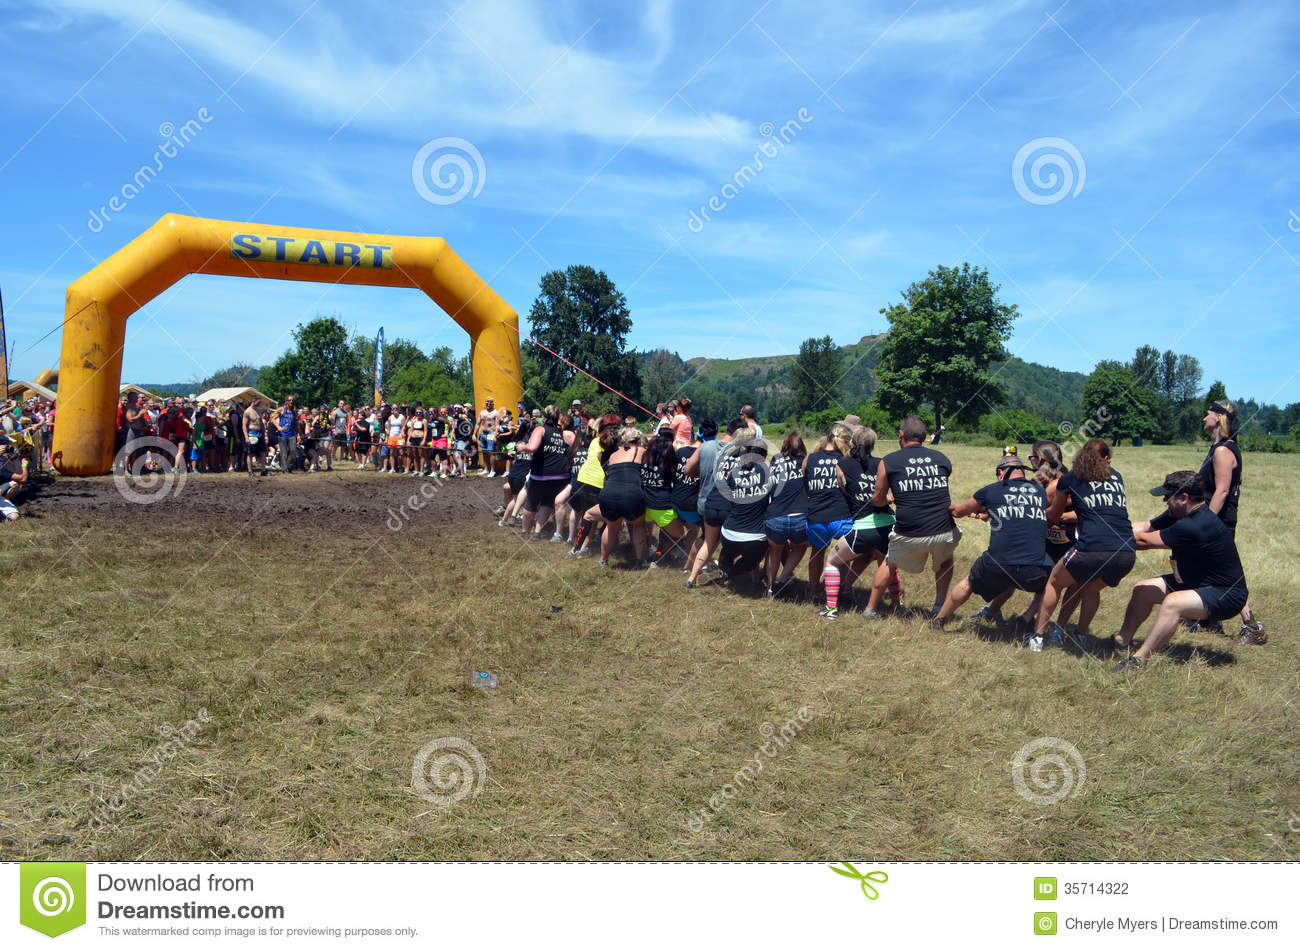 Runners In The Dirty Dash 5k Mud Run At The Starting Line Tug O War